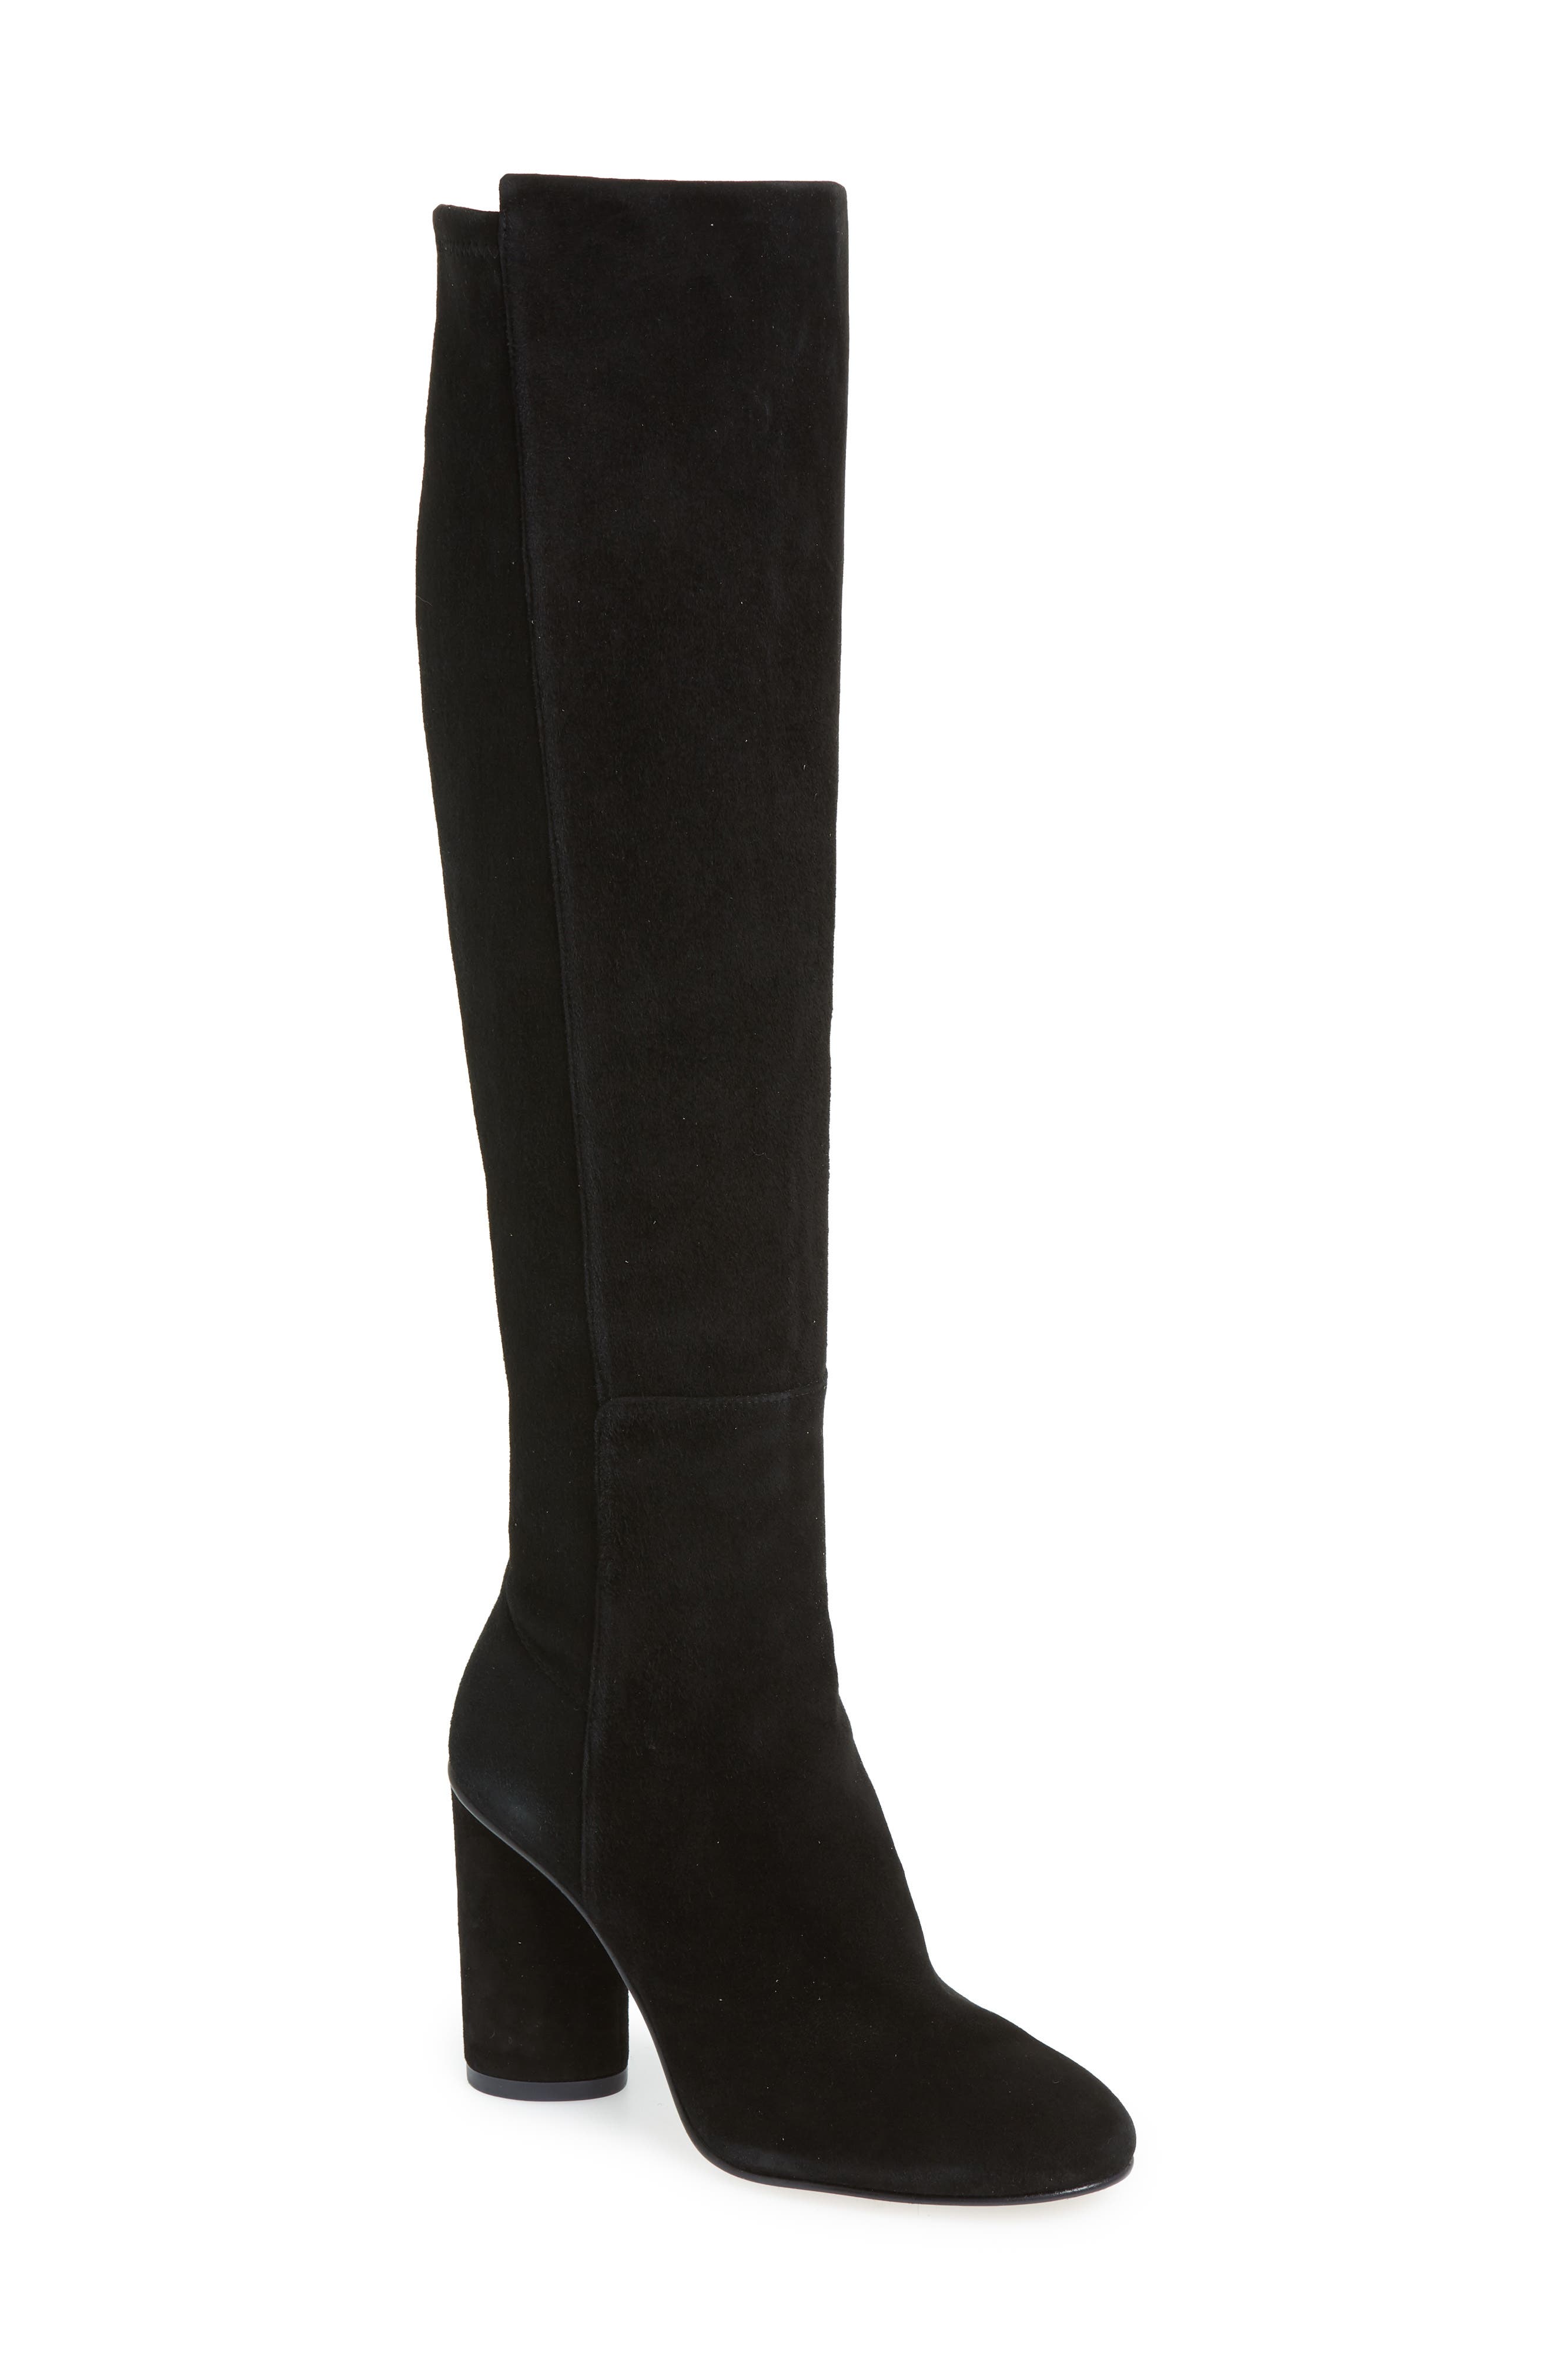 eloise over the knee boot